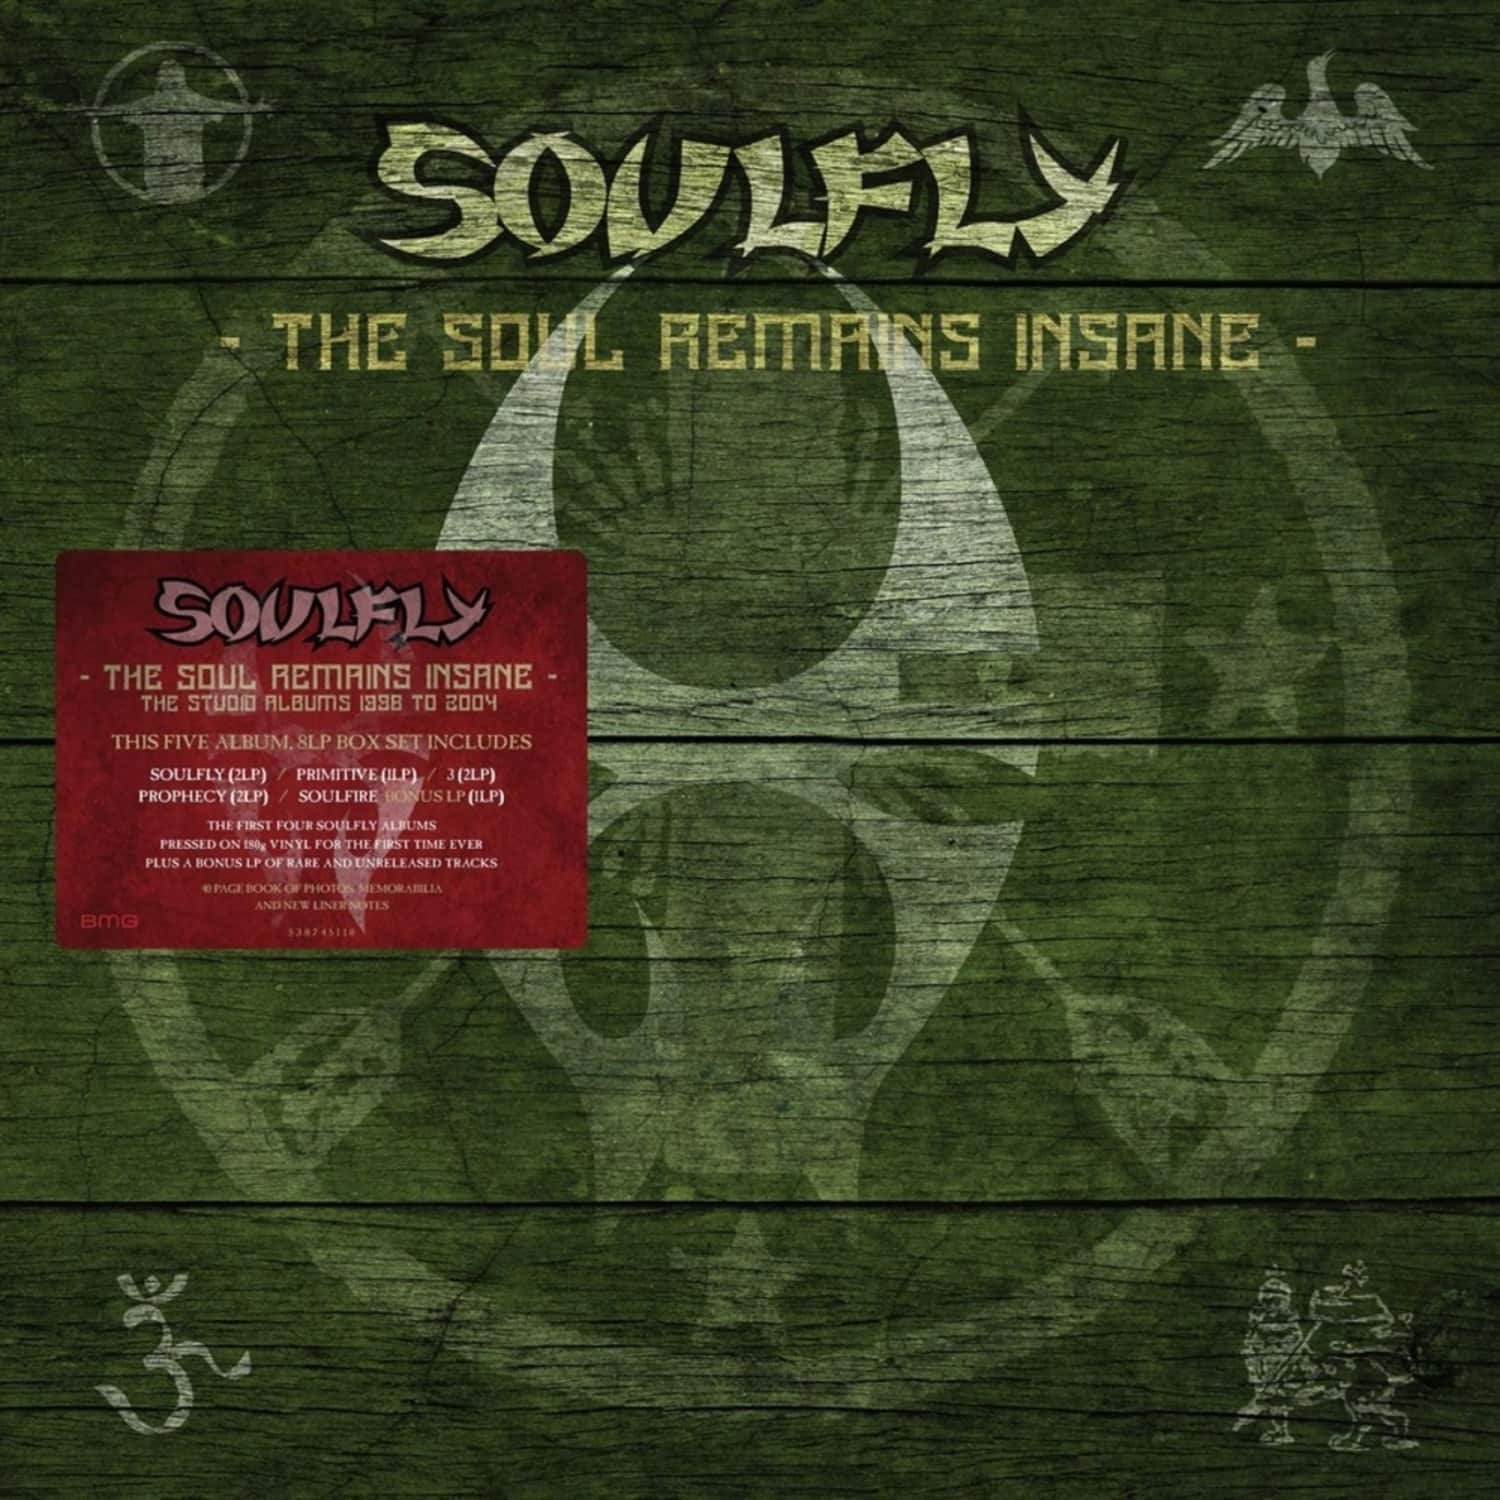 Soulfly - THE SOUL REMAINS INSANE:STUDIO ALBUMS 1998 TO 2004 